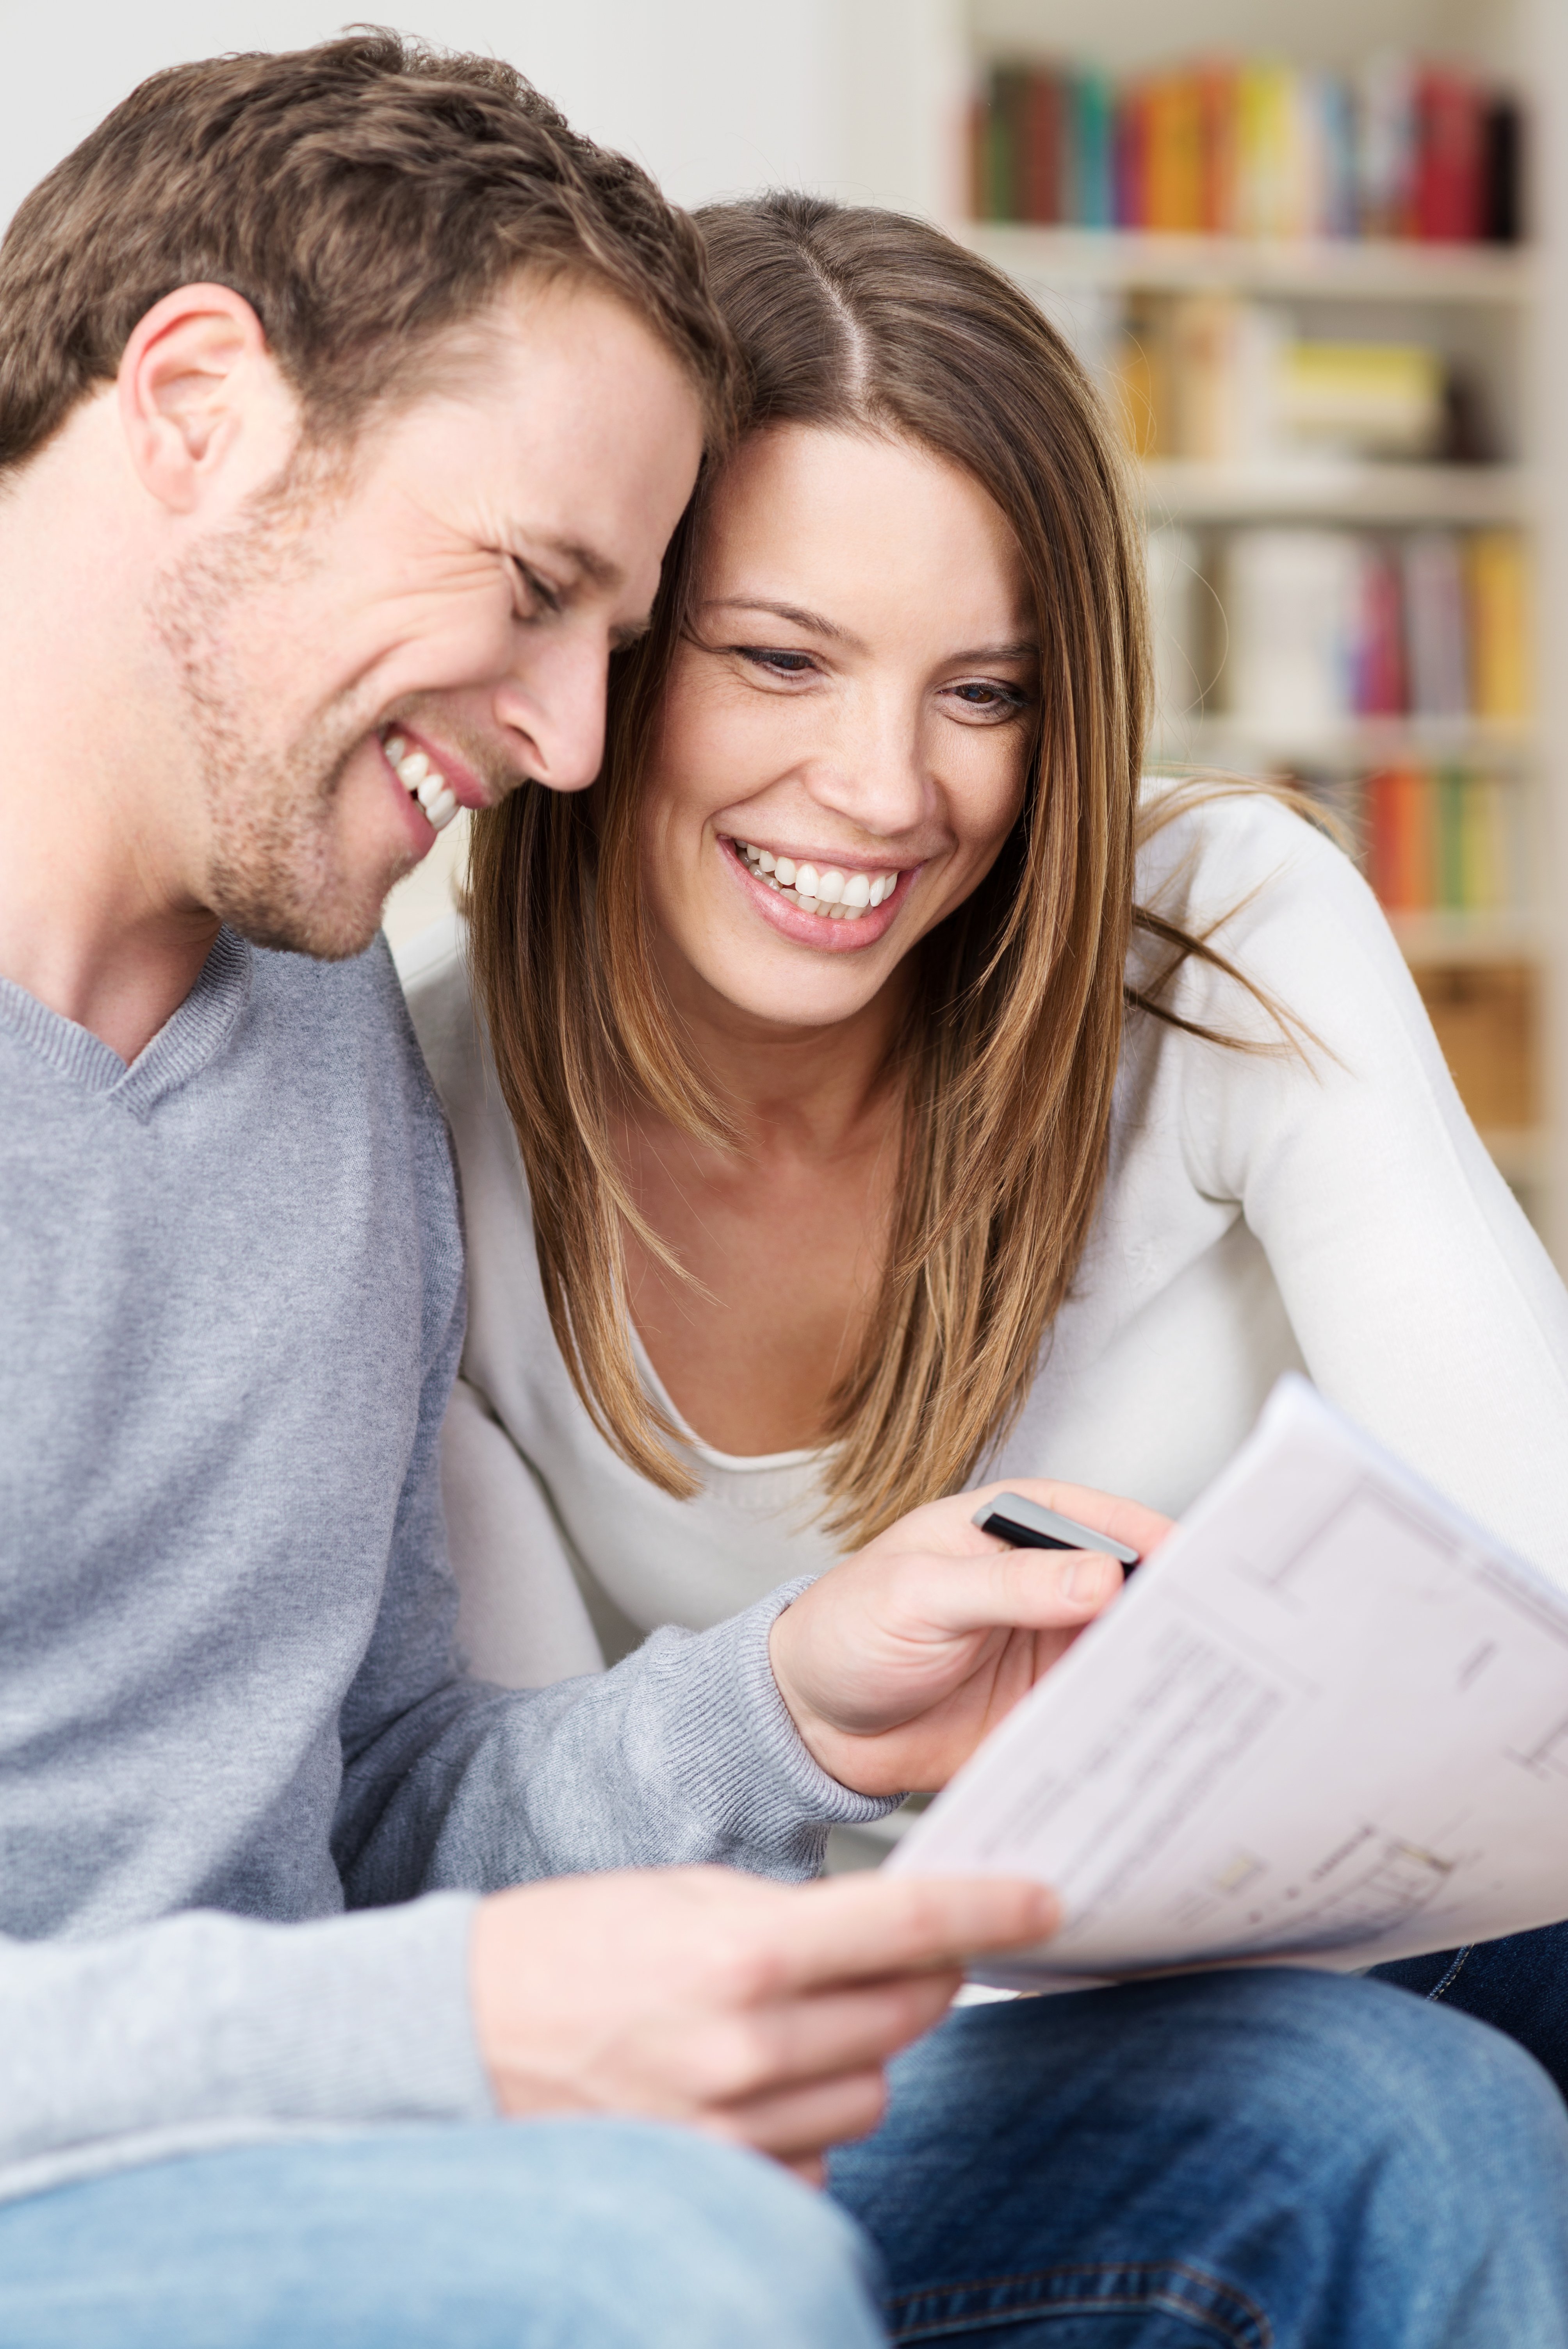 Close up portrait of an attractive young couple laughing as they discuss paperwork together at home in the living room